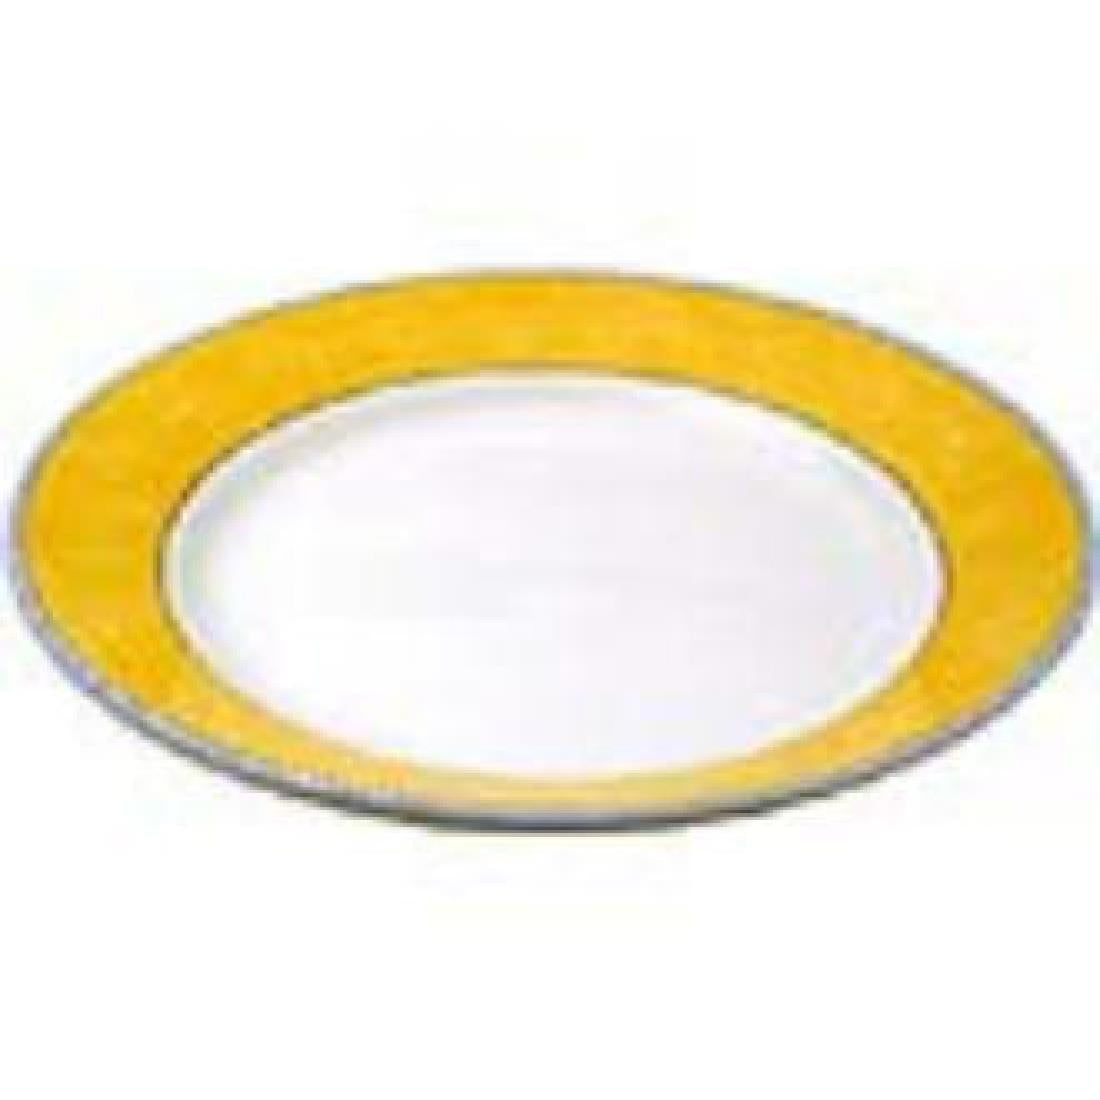 Churchill New Horizons Marble Border Mediterranean Dishes Yellow 252mm JD Catering Equipment Solutions Ltd